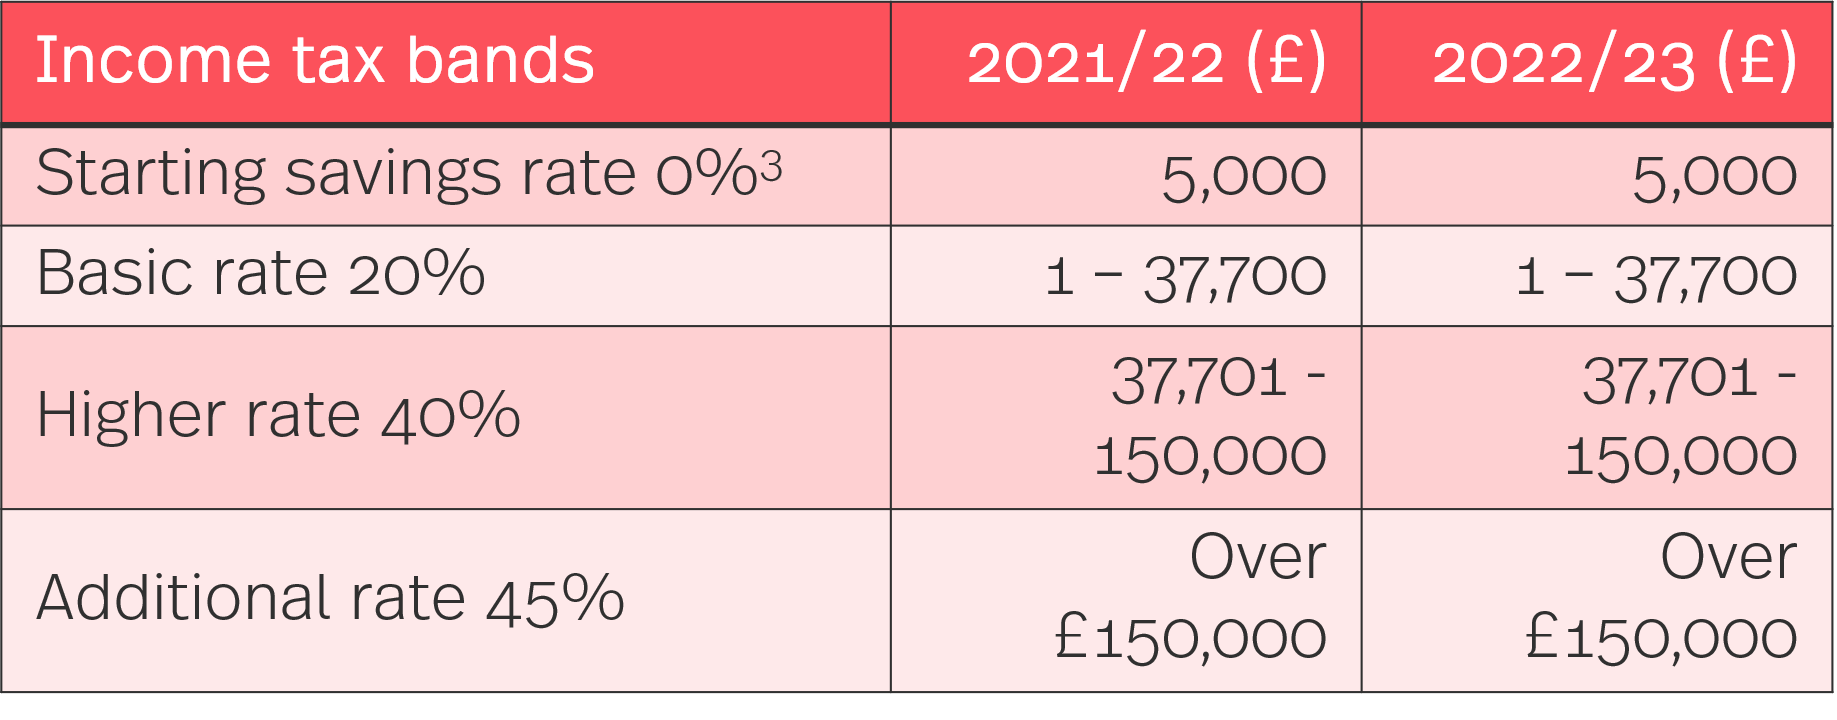 Hmrc Tax Rates And Allowances For 2022 23 Simmons